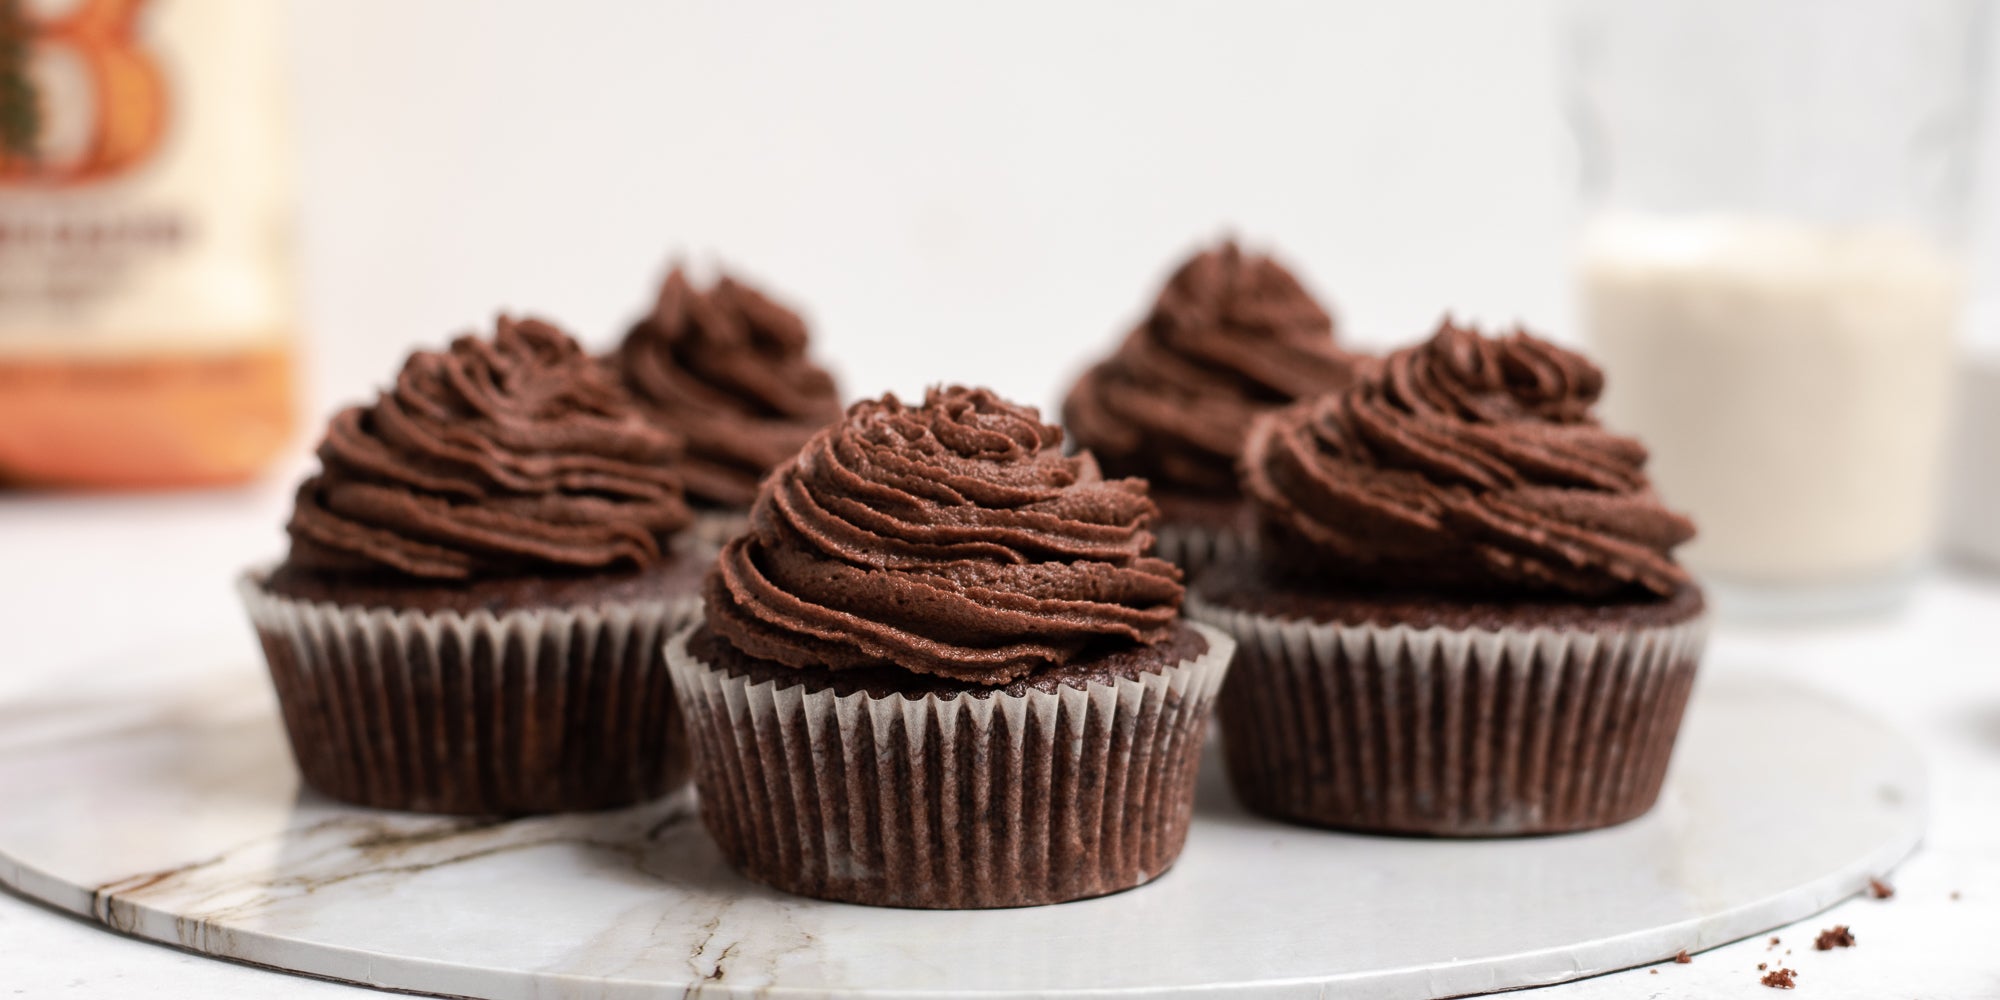 Close up of Vegan Chocolate Cupcakes piped with vegan chocolate buttercream, served on a marble tray